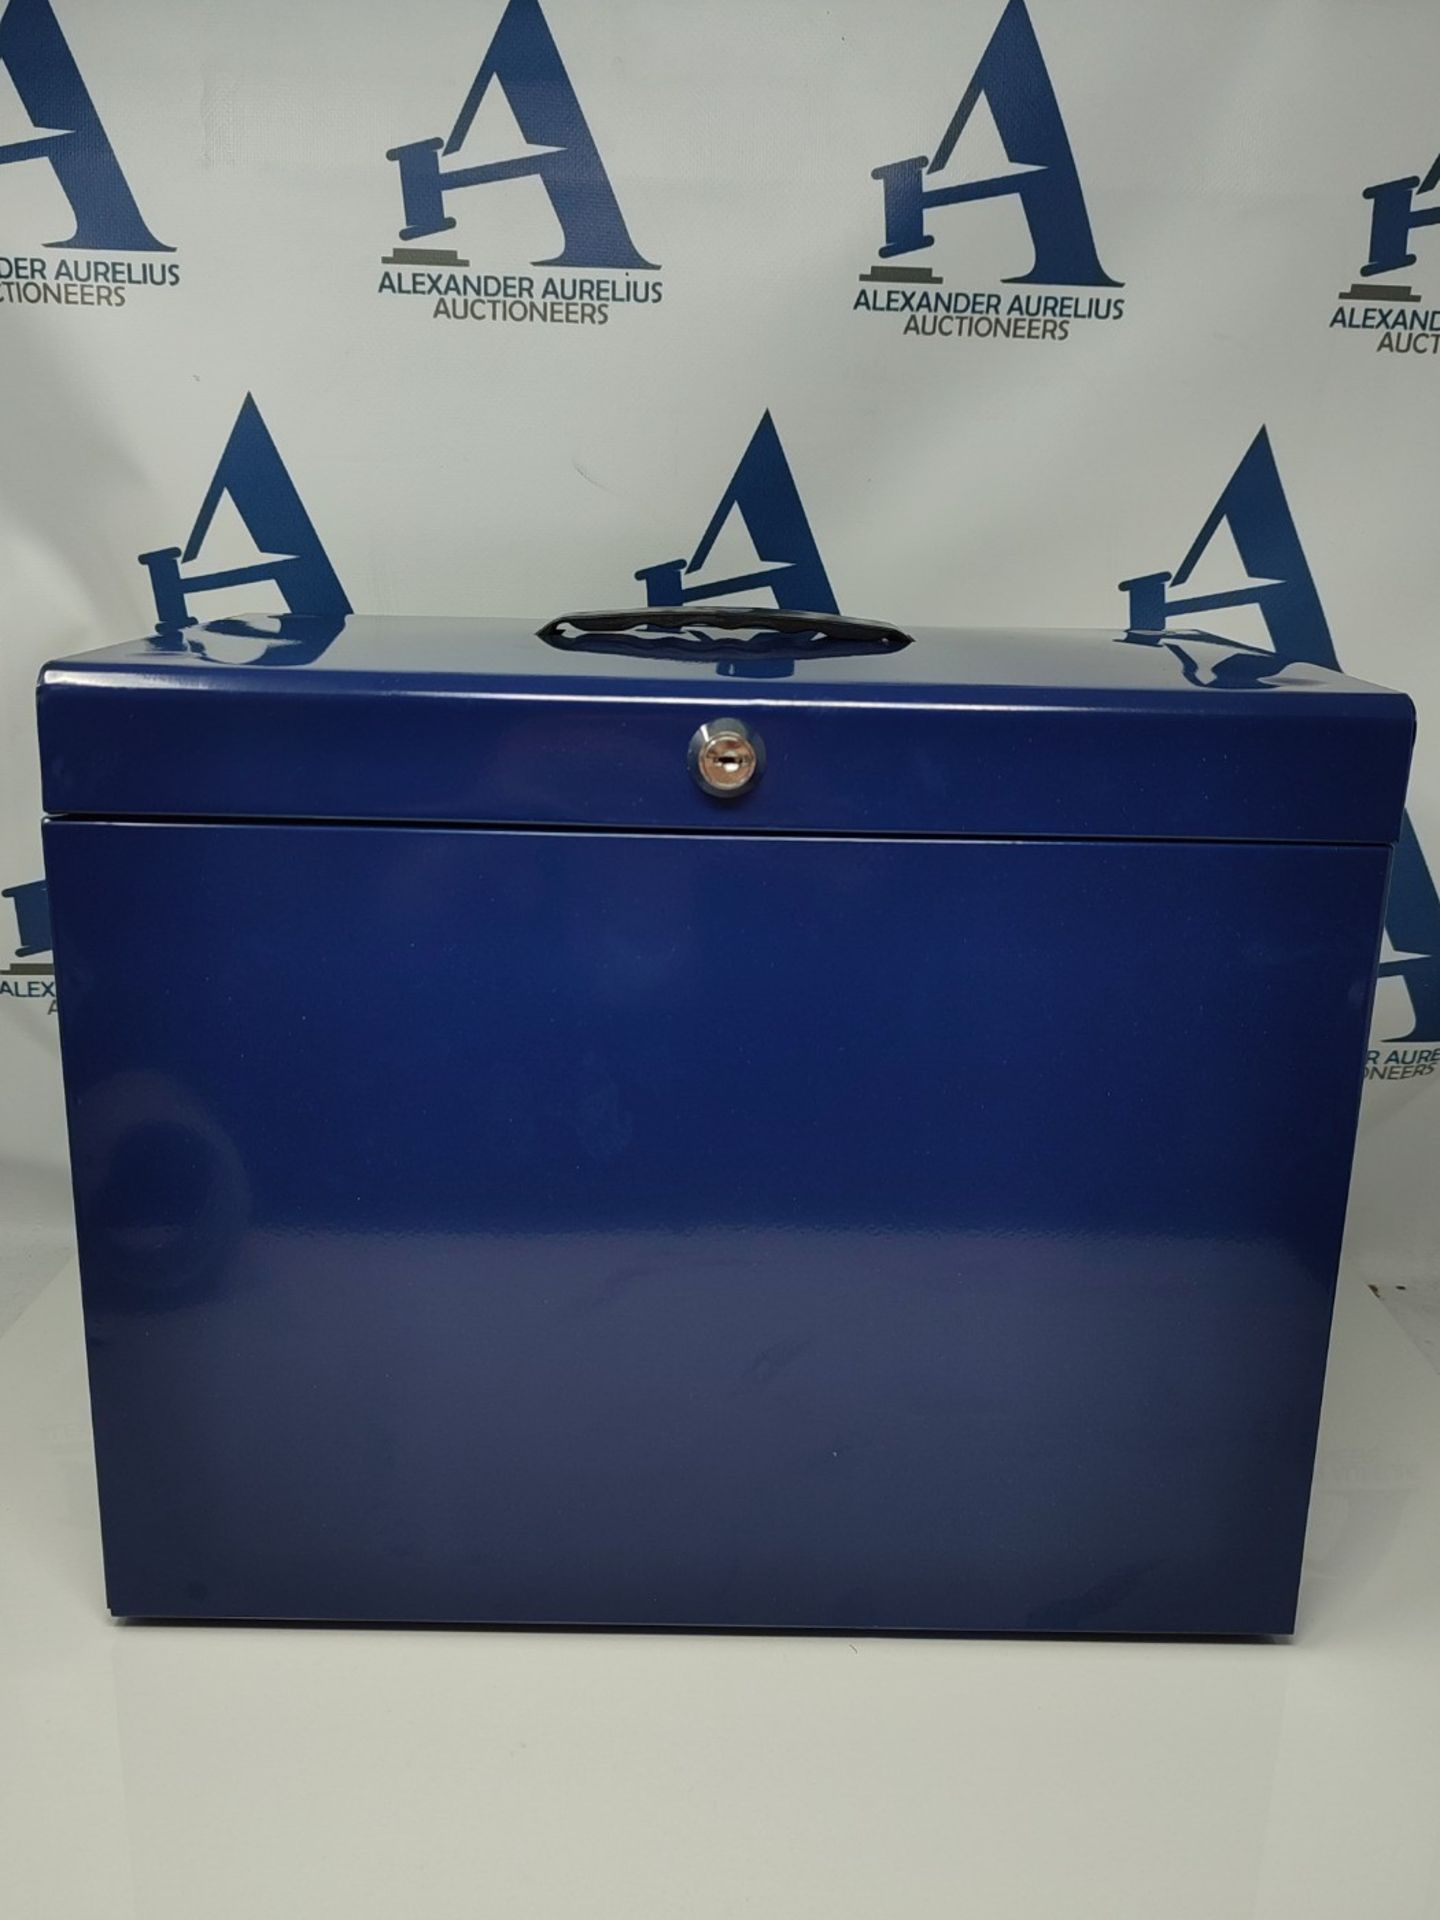 Cathedral Metal A4 File Box - Blue Home - Image 3 of 3